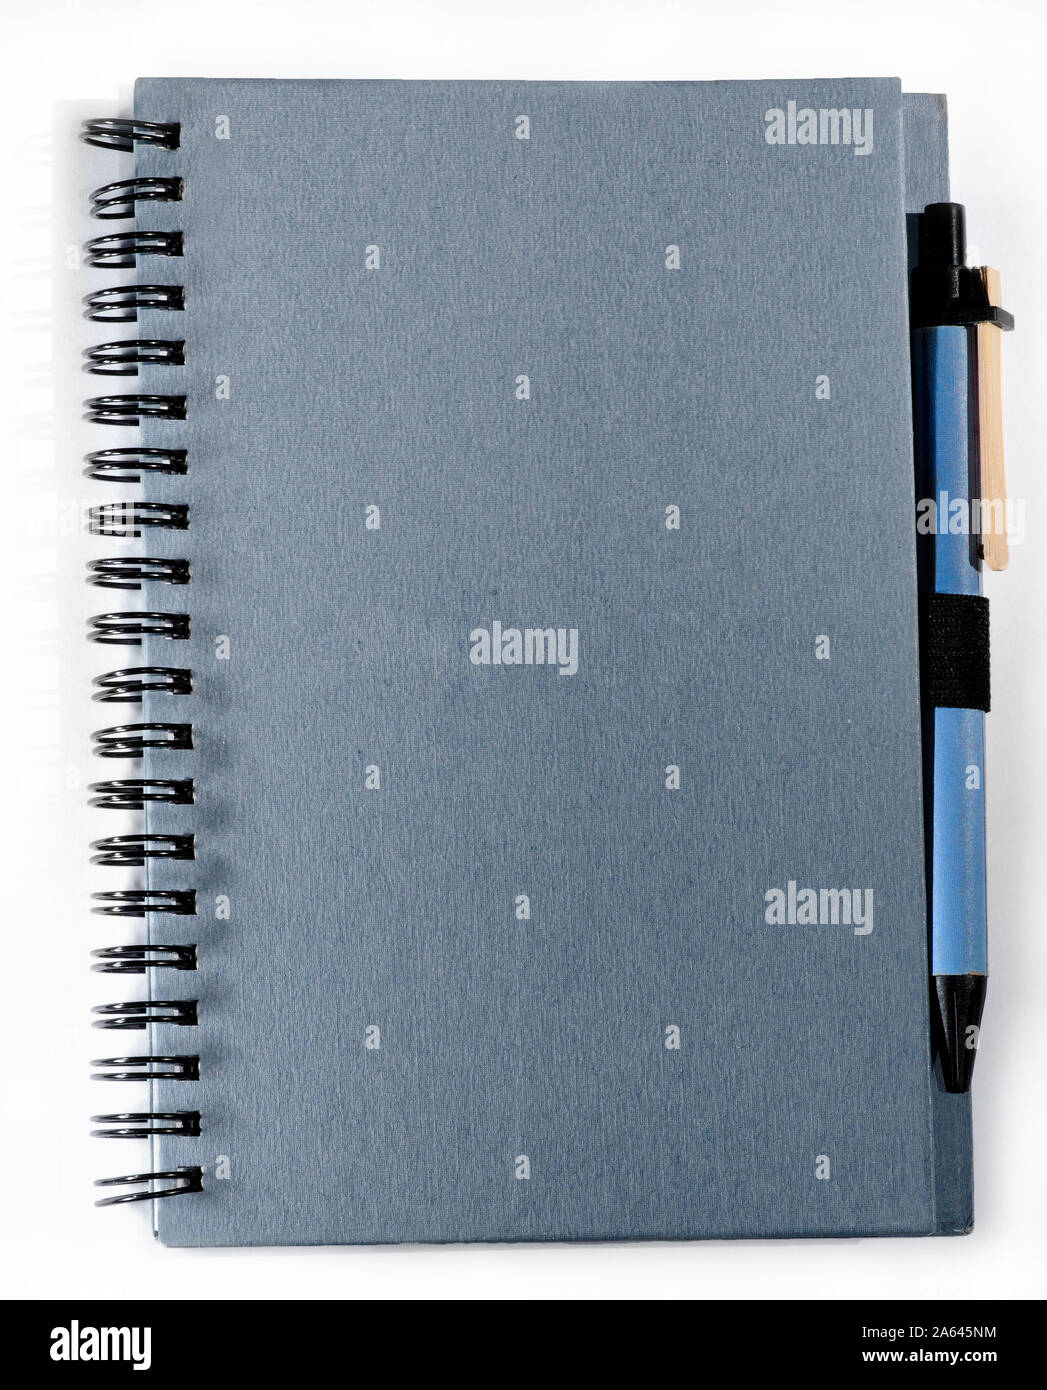 Spiral bound notebook with attached pen, isolated on white. Stock Photo